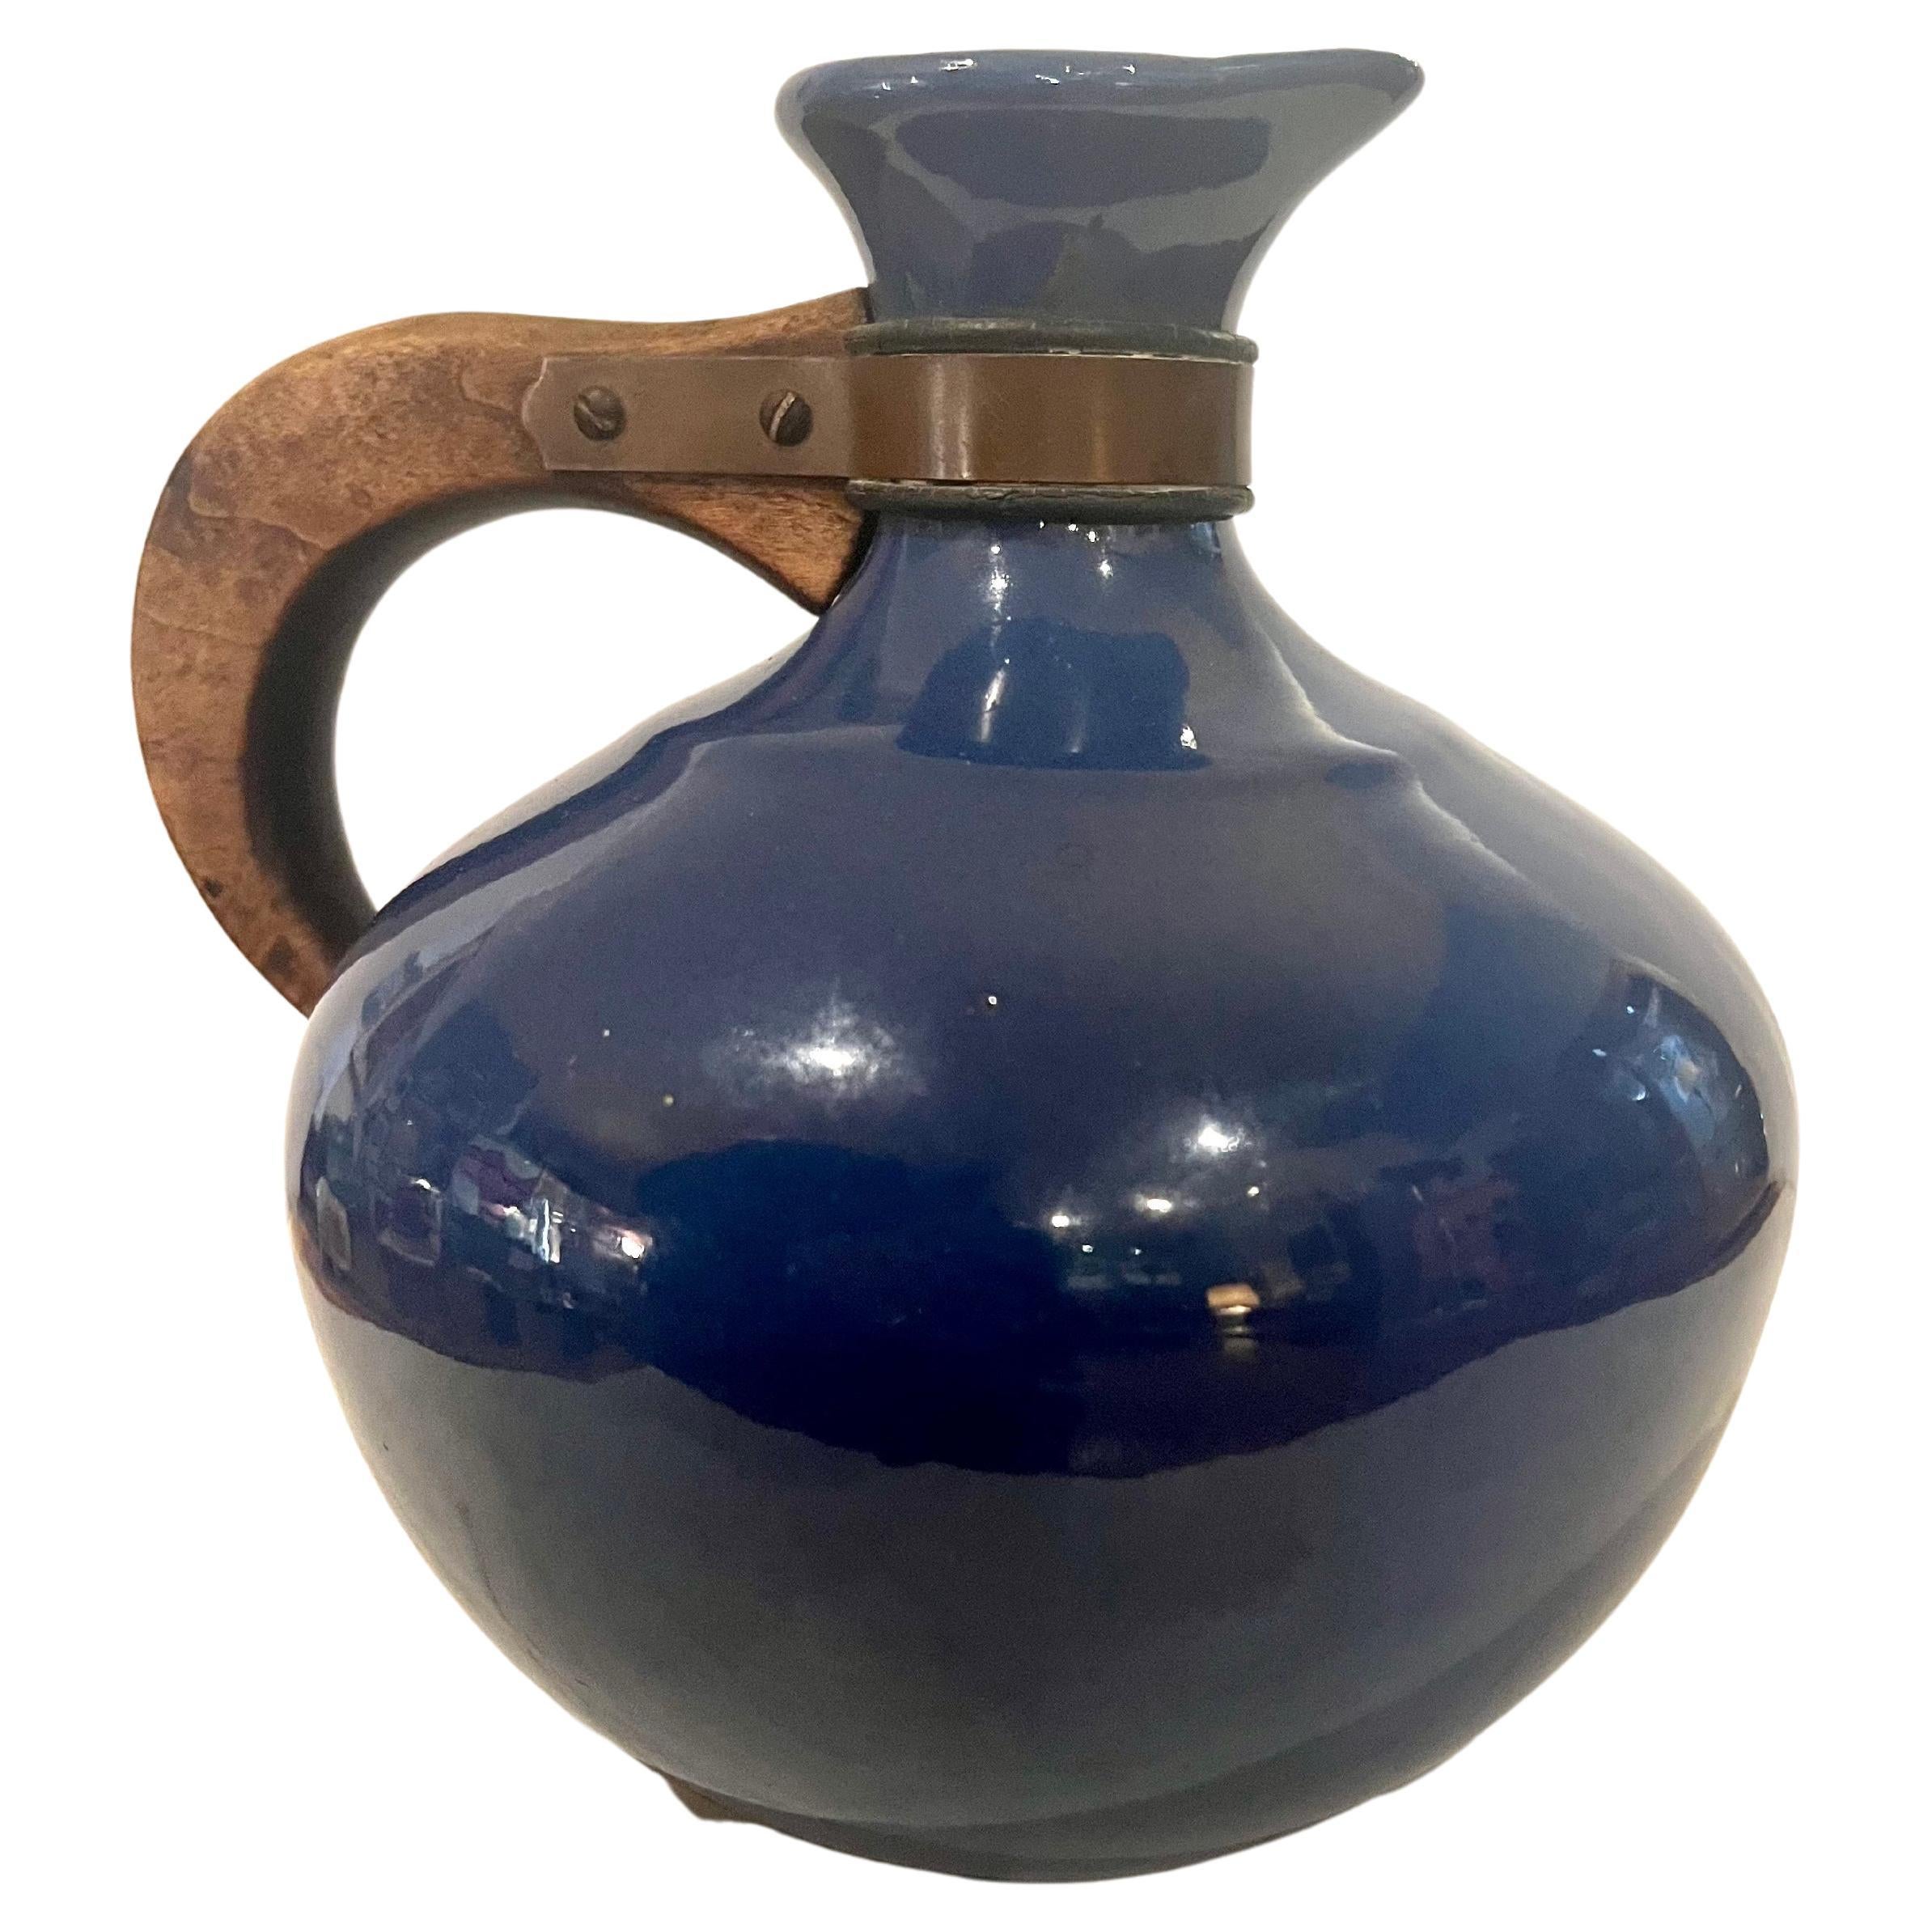 Classic Red Wing carafe , in excellent original condition, circa 1940's good handle with copper fittings no chips or cracks , beautiful cobalt blue glaze.